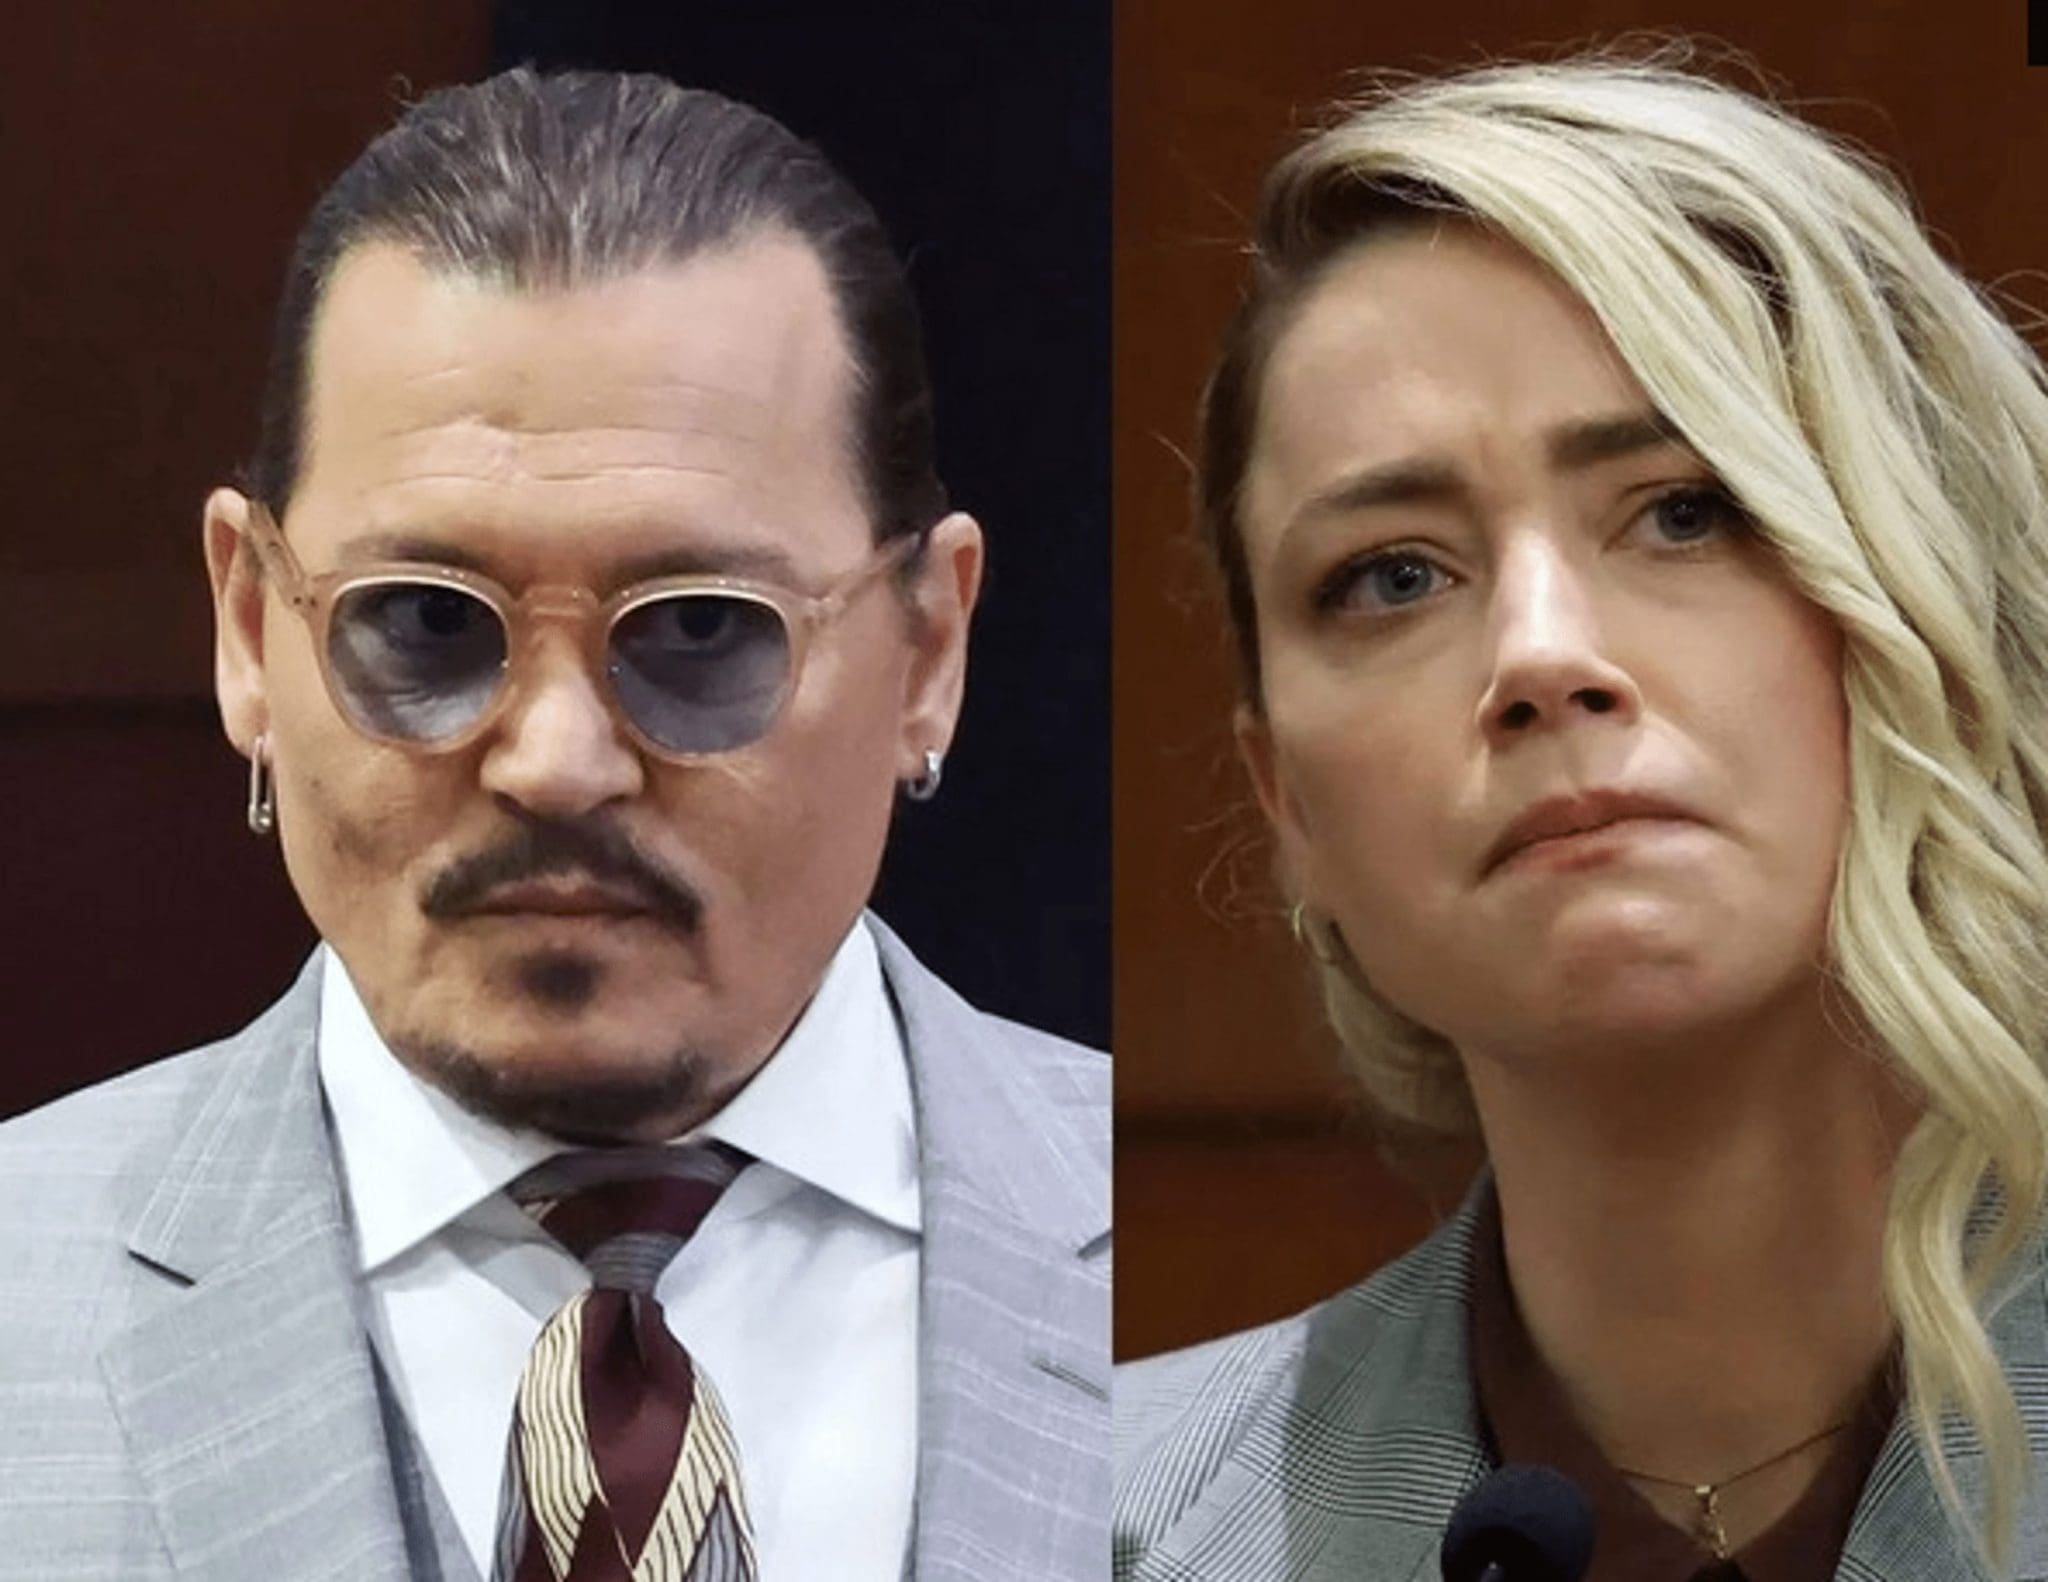 Johnny Depp's lawyers say he may waive $8 million recoveries from Amber Heard after she lost in court